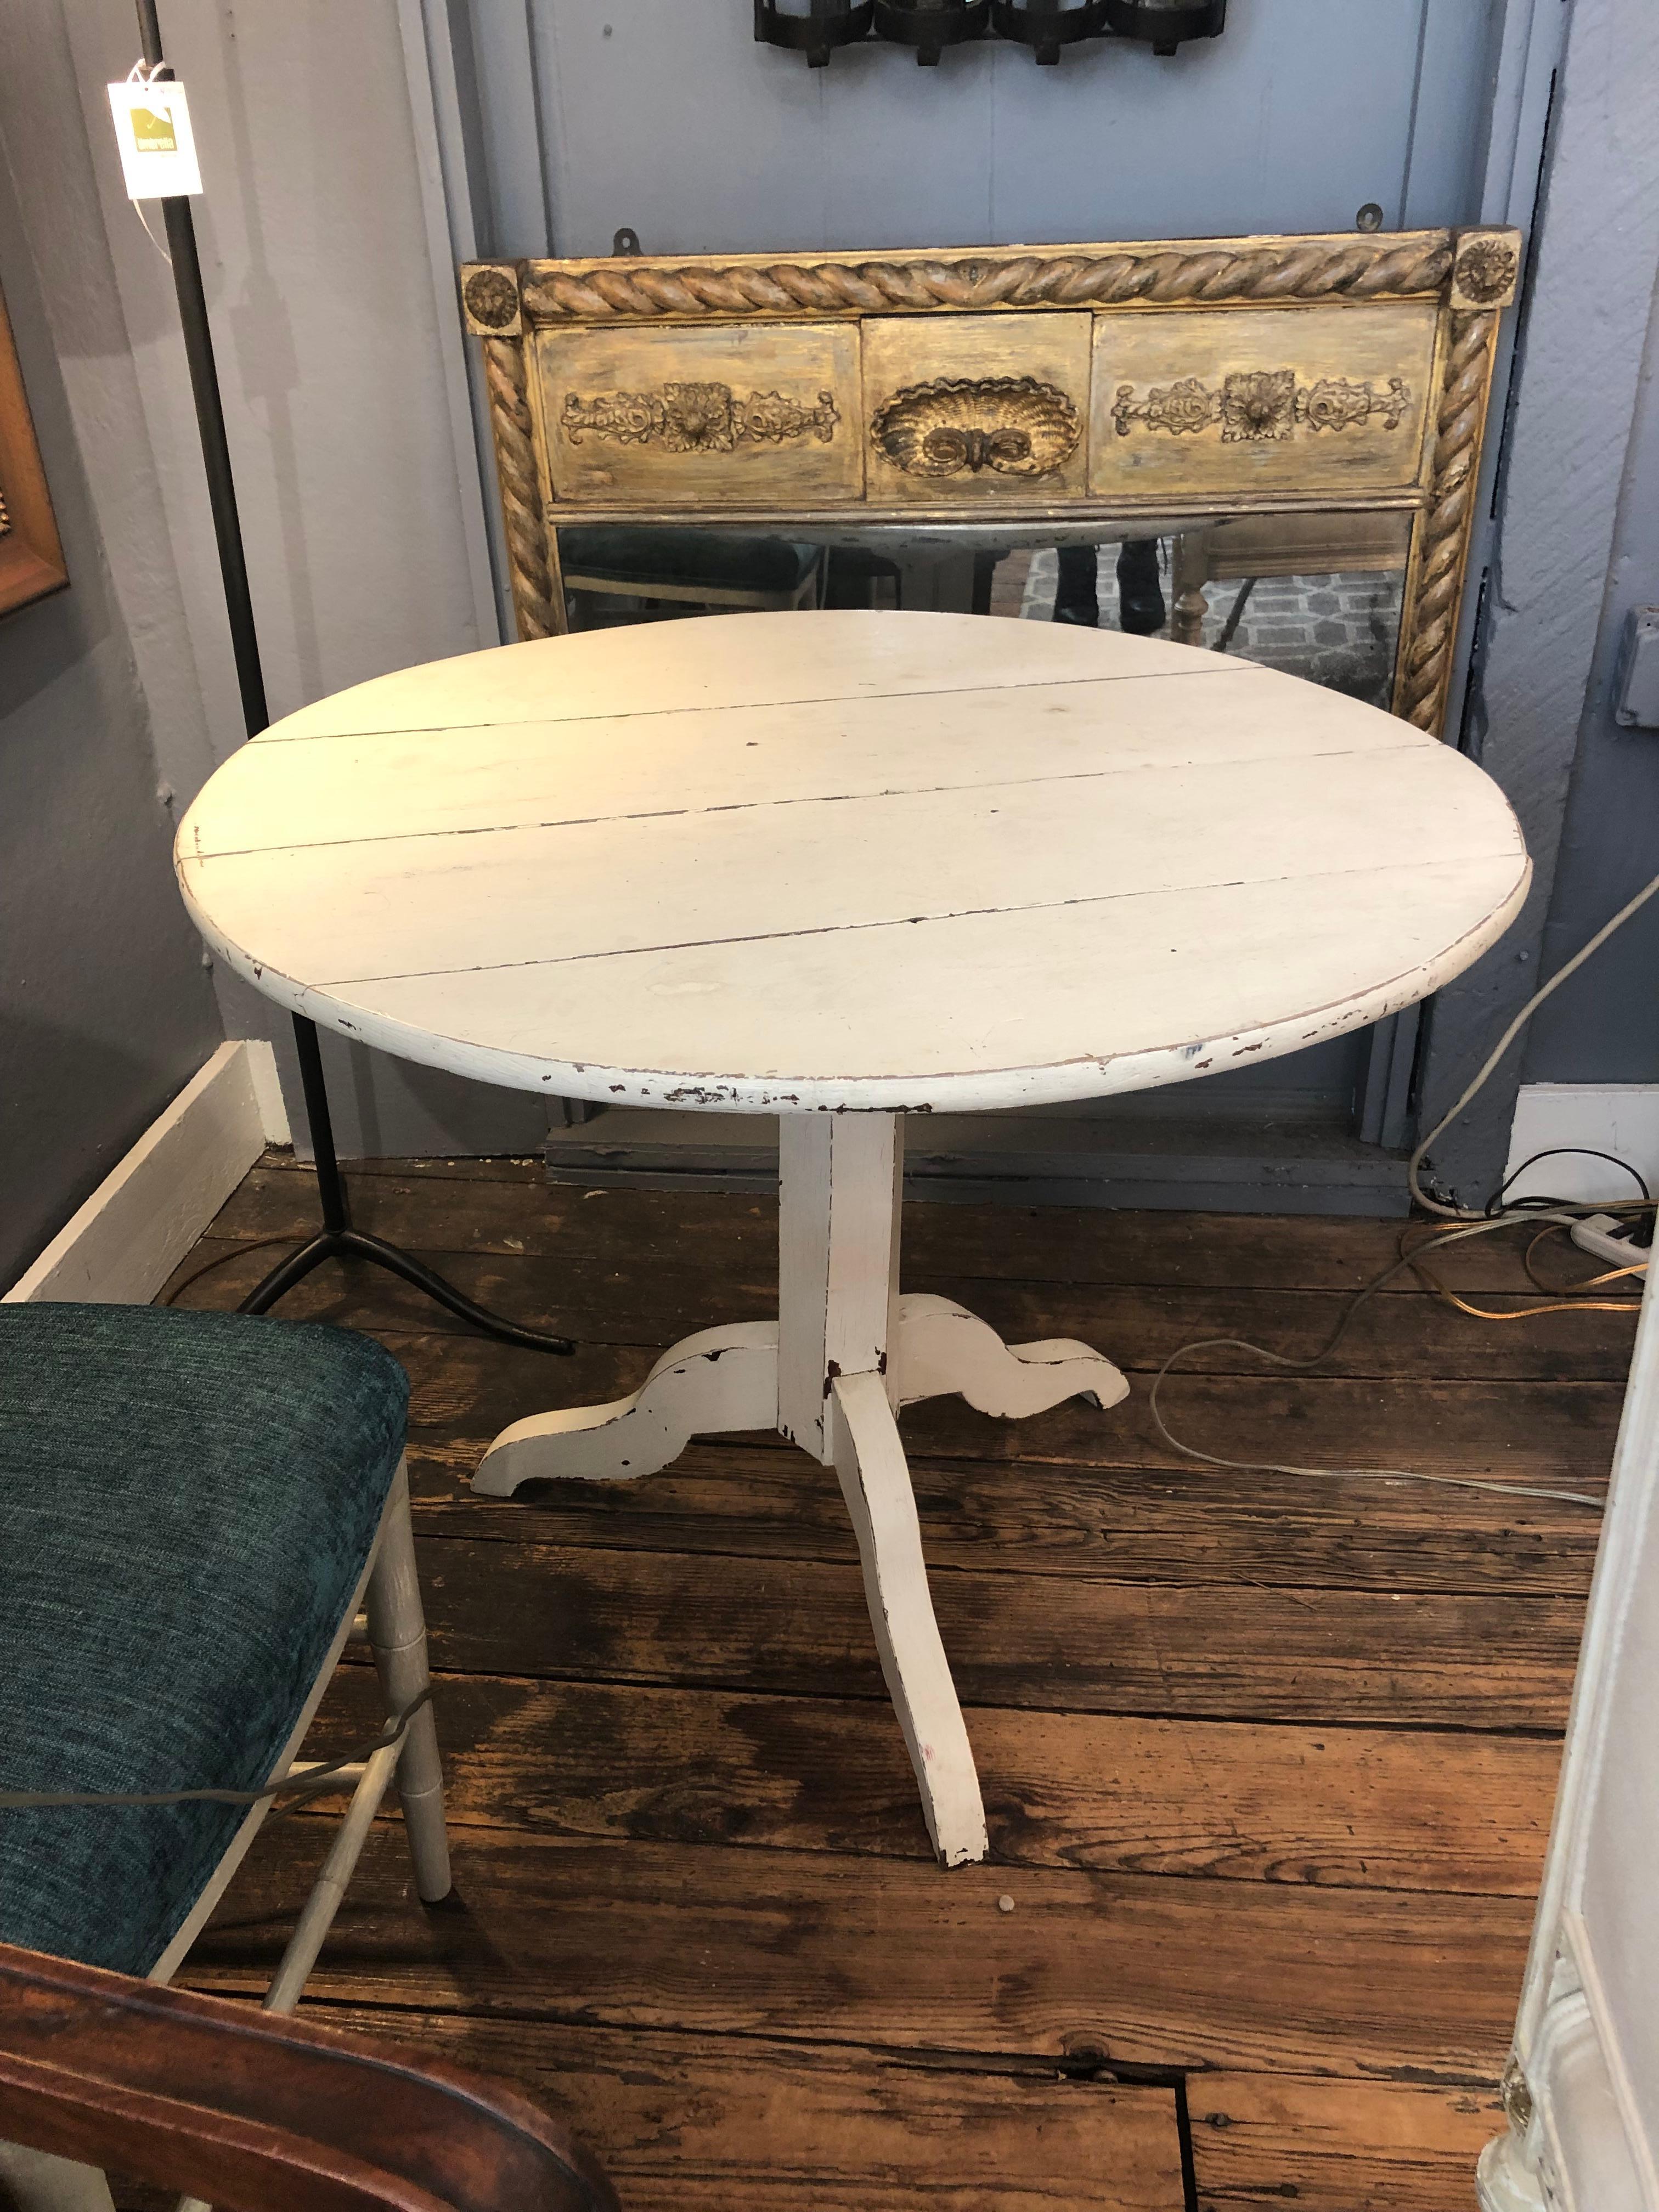 Rustic creamy white painted wood Vermont tilt top round dining table.  Perfect size for breakfast table.  45.5 h when in up position